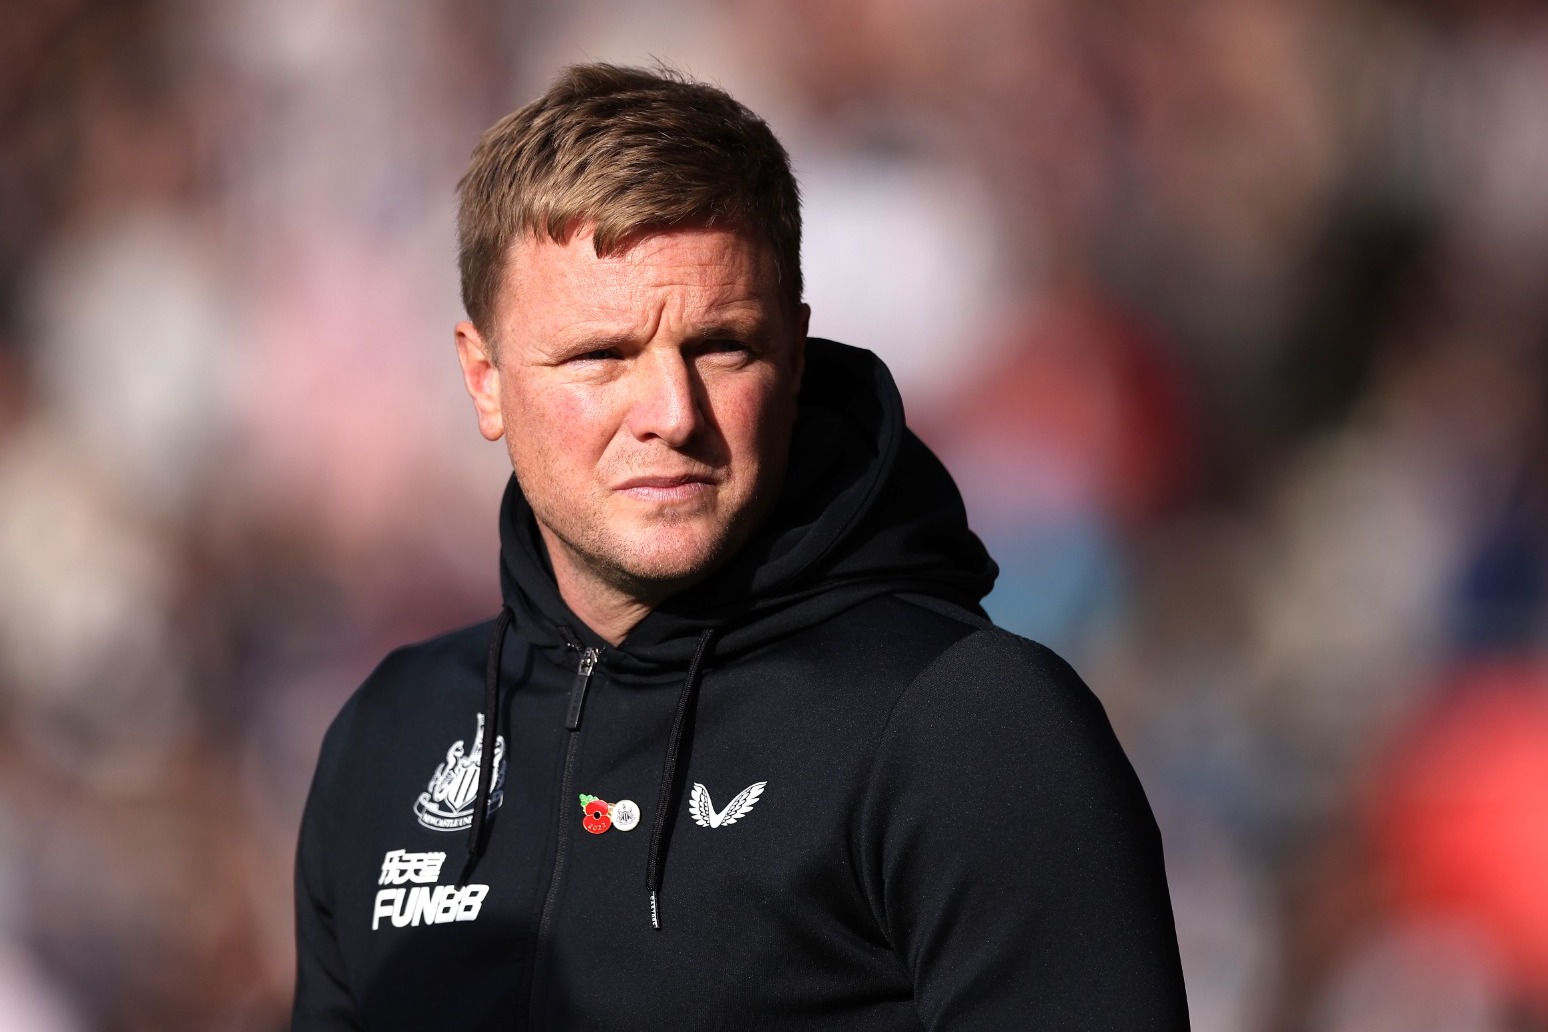 Eddie Howe wants Newcastle to treat trophy drought as driving force not burden 